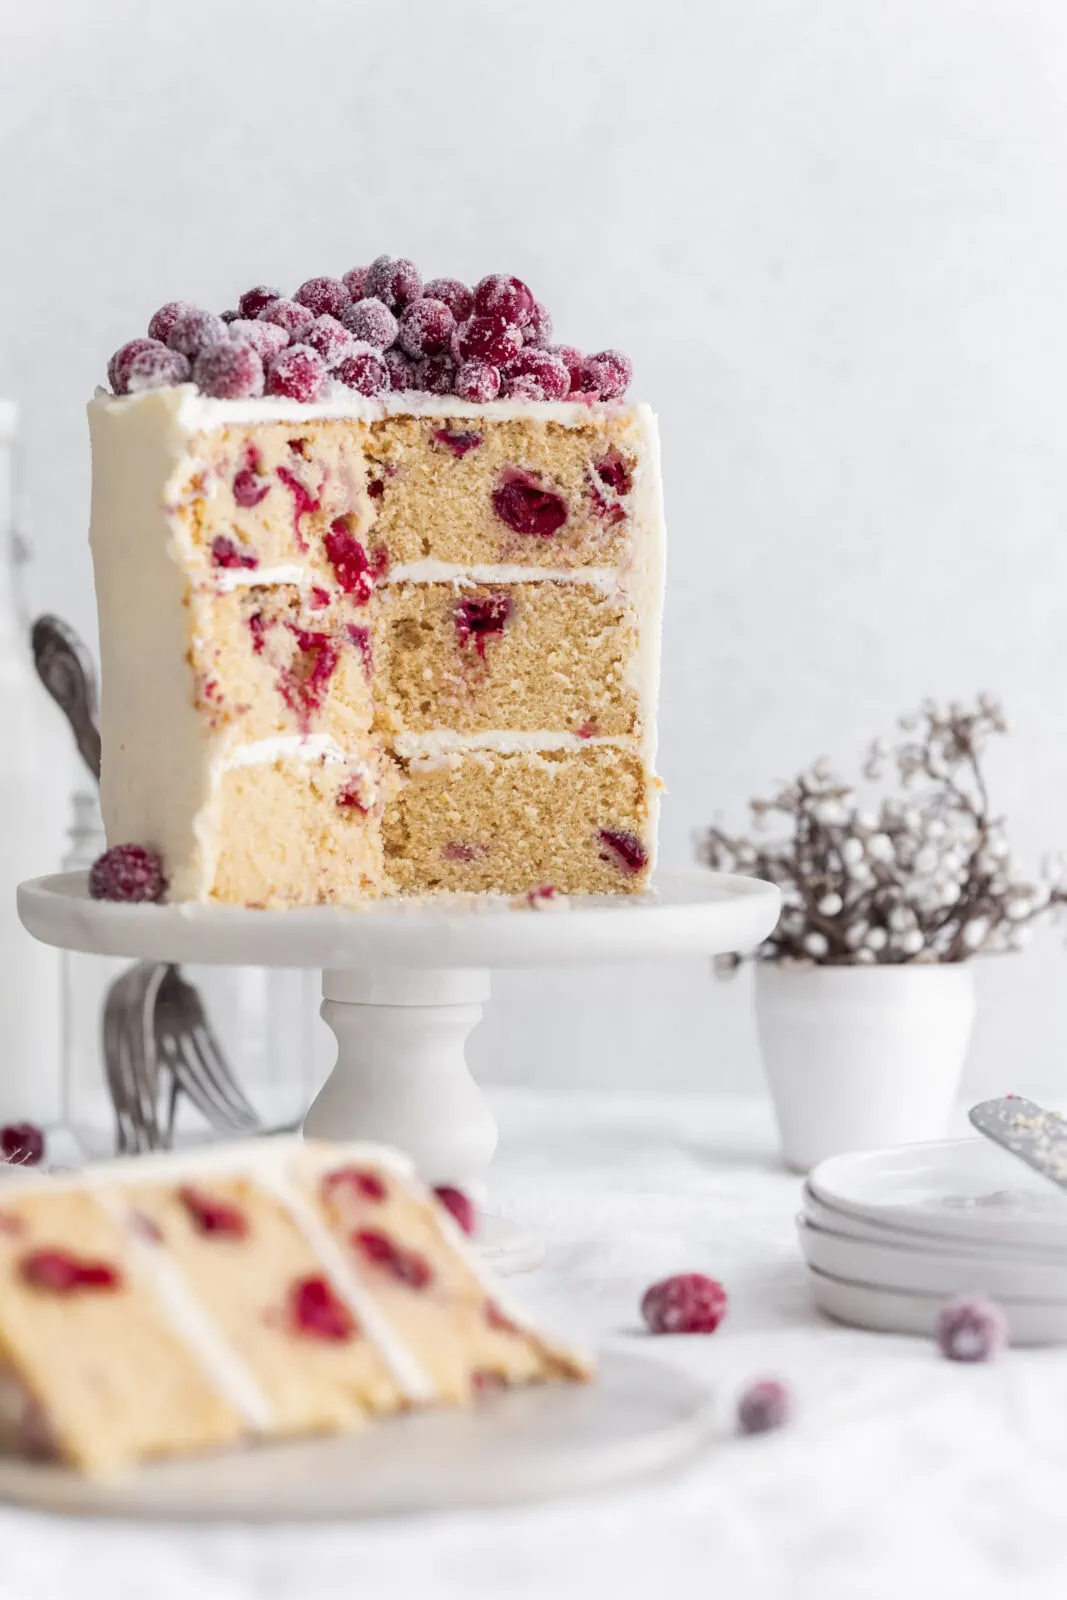 white chocolate cranberry cake with a slice taken out